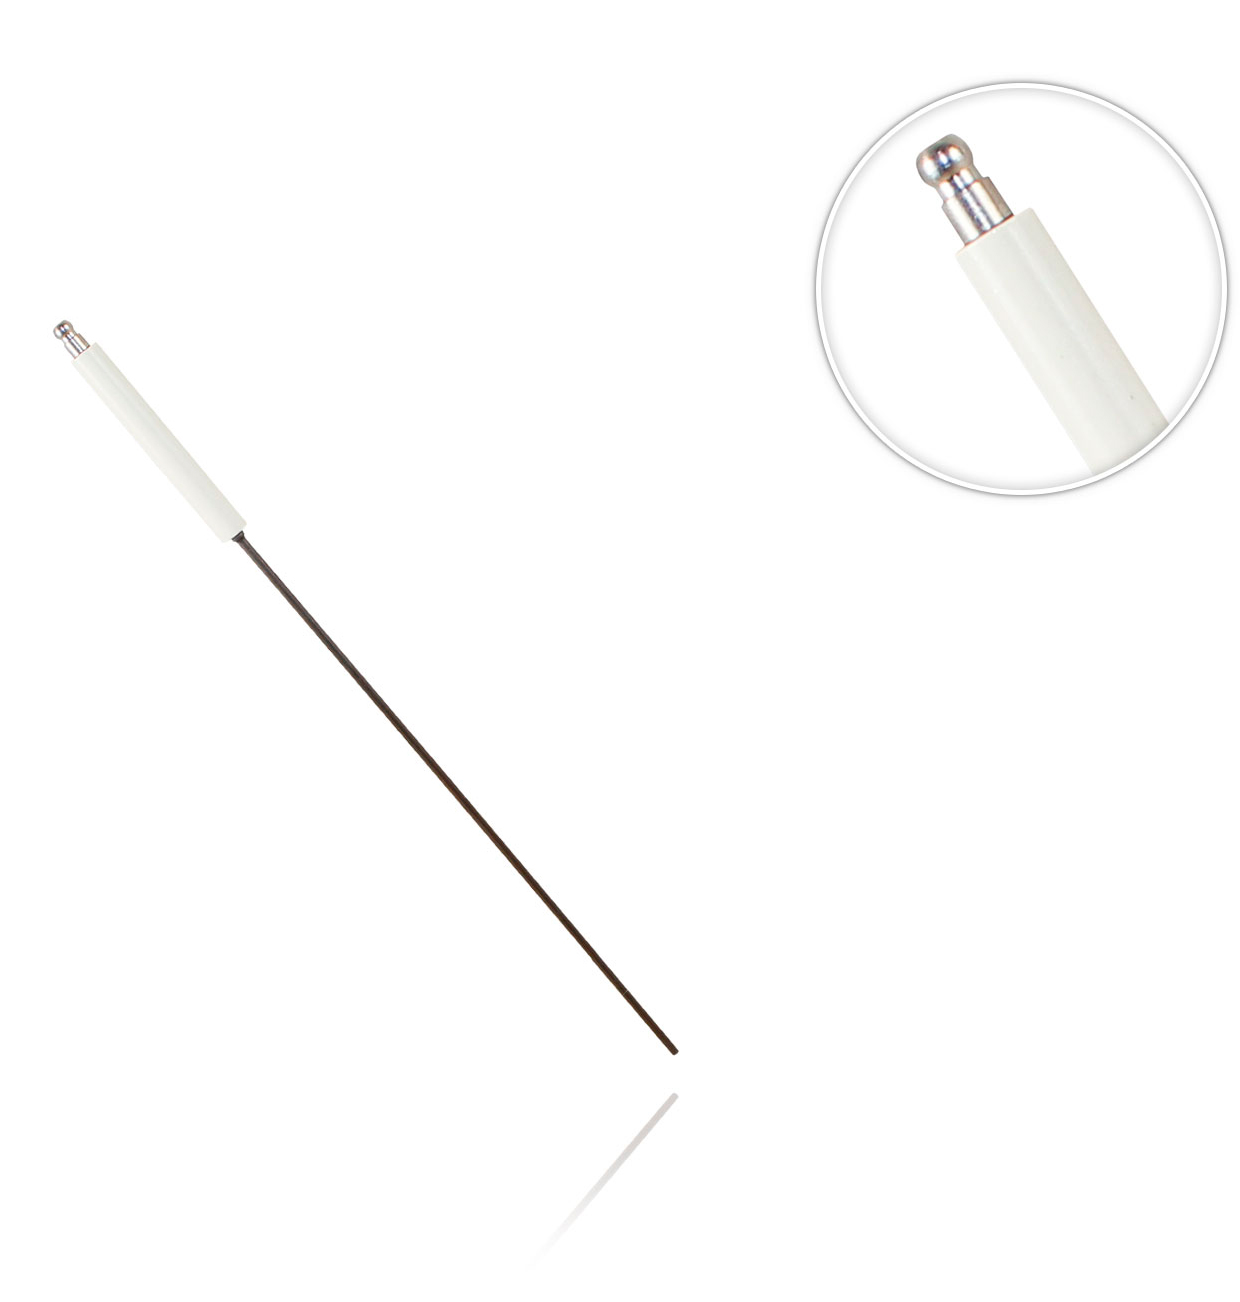 14x70/3x300/6.35mm IONISATION ELECTRODE